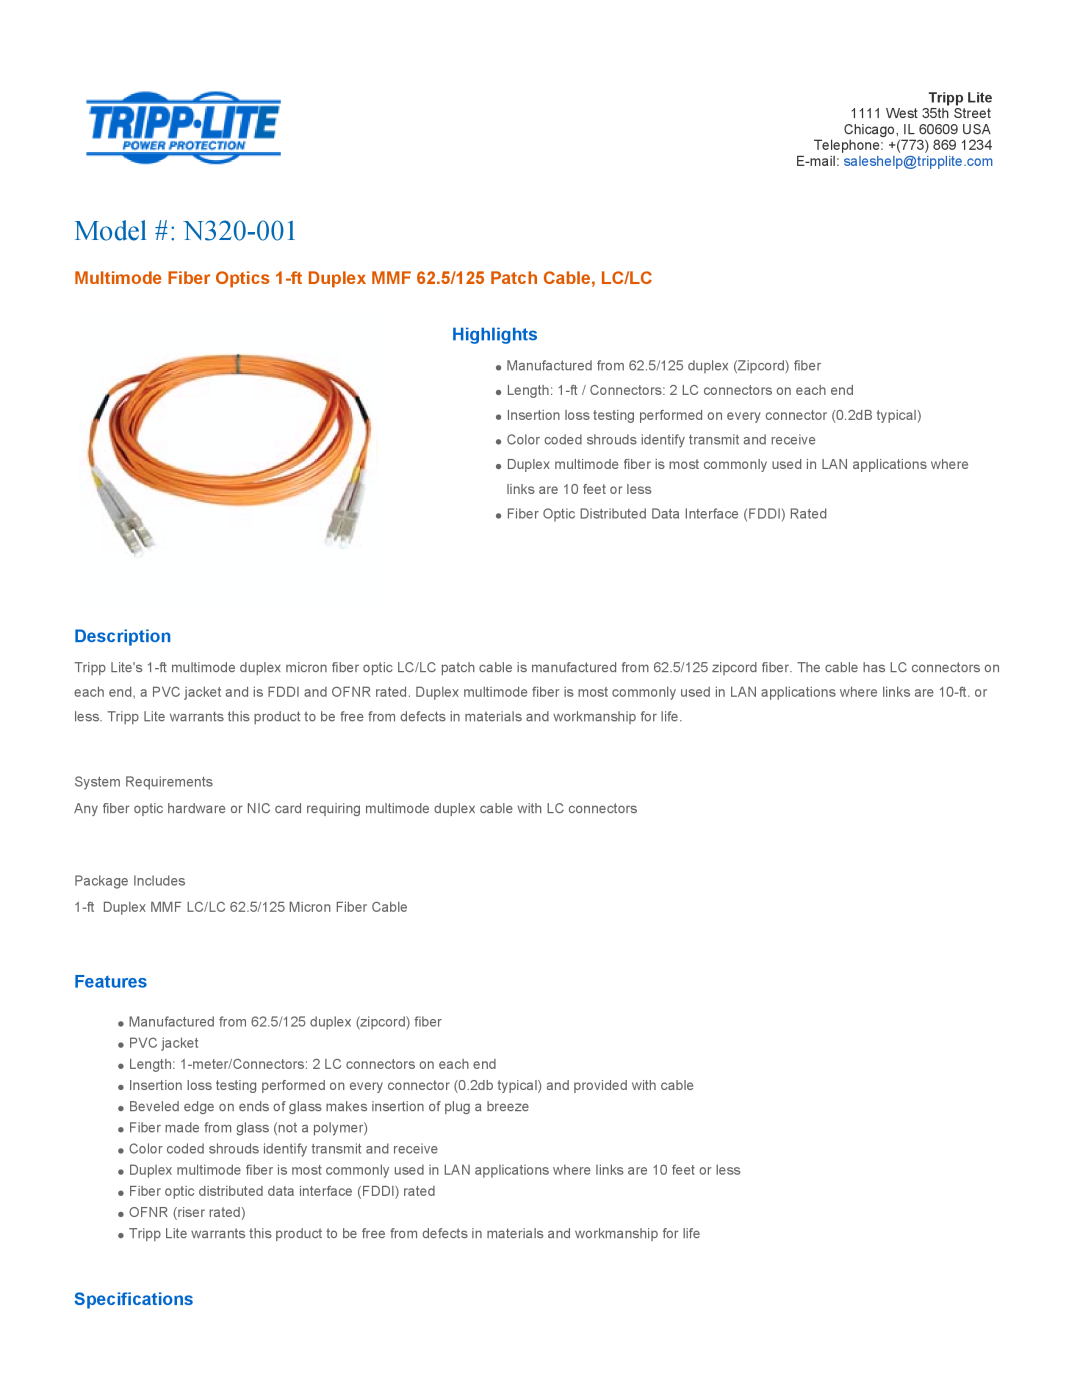 Tripp Lite specifications Model # N320-001, Multimode Fiber Optics 1-ft Duplex MMF 62.5/125 Patch Cable, LC/LC 